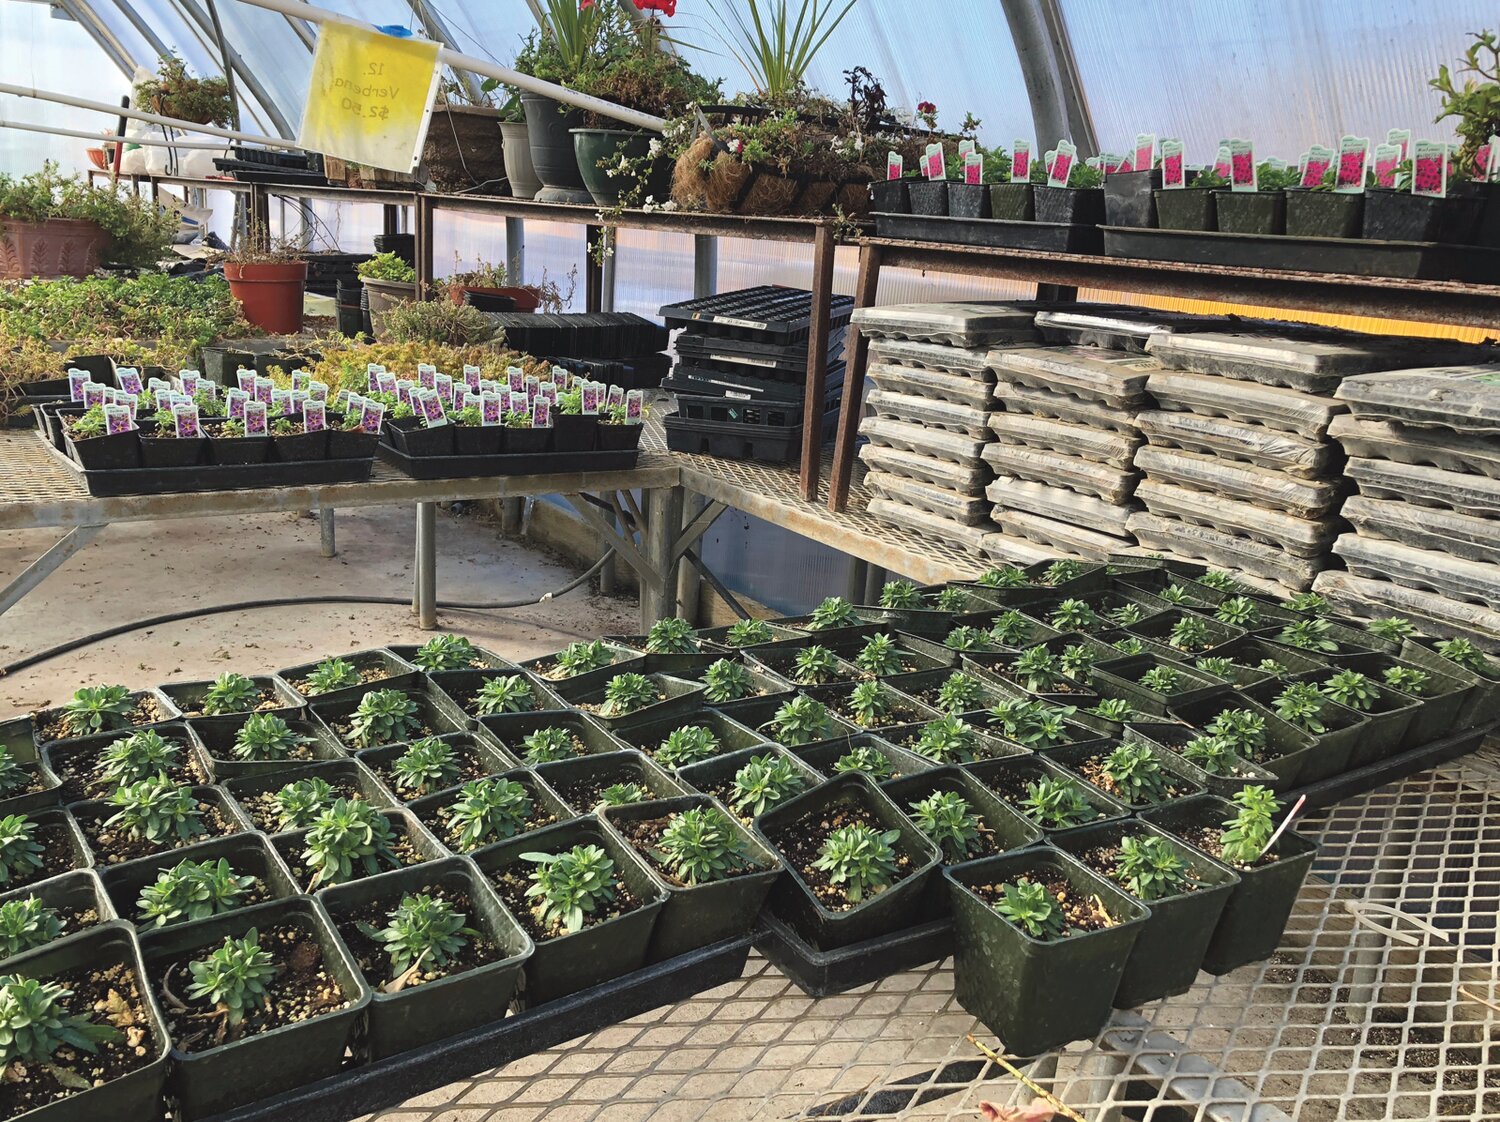 The Brewster FFA annual spring plant sale starts here several months prior in the school greenhouse.